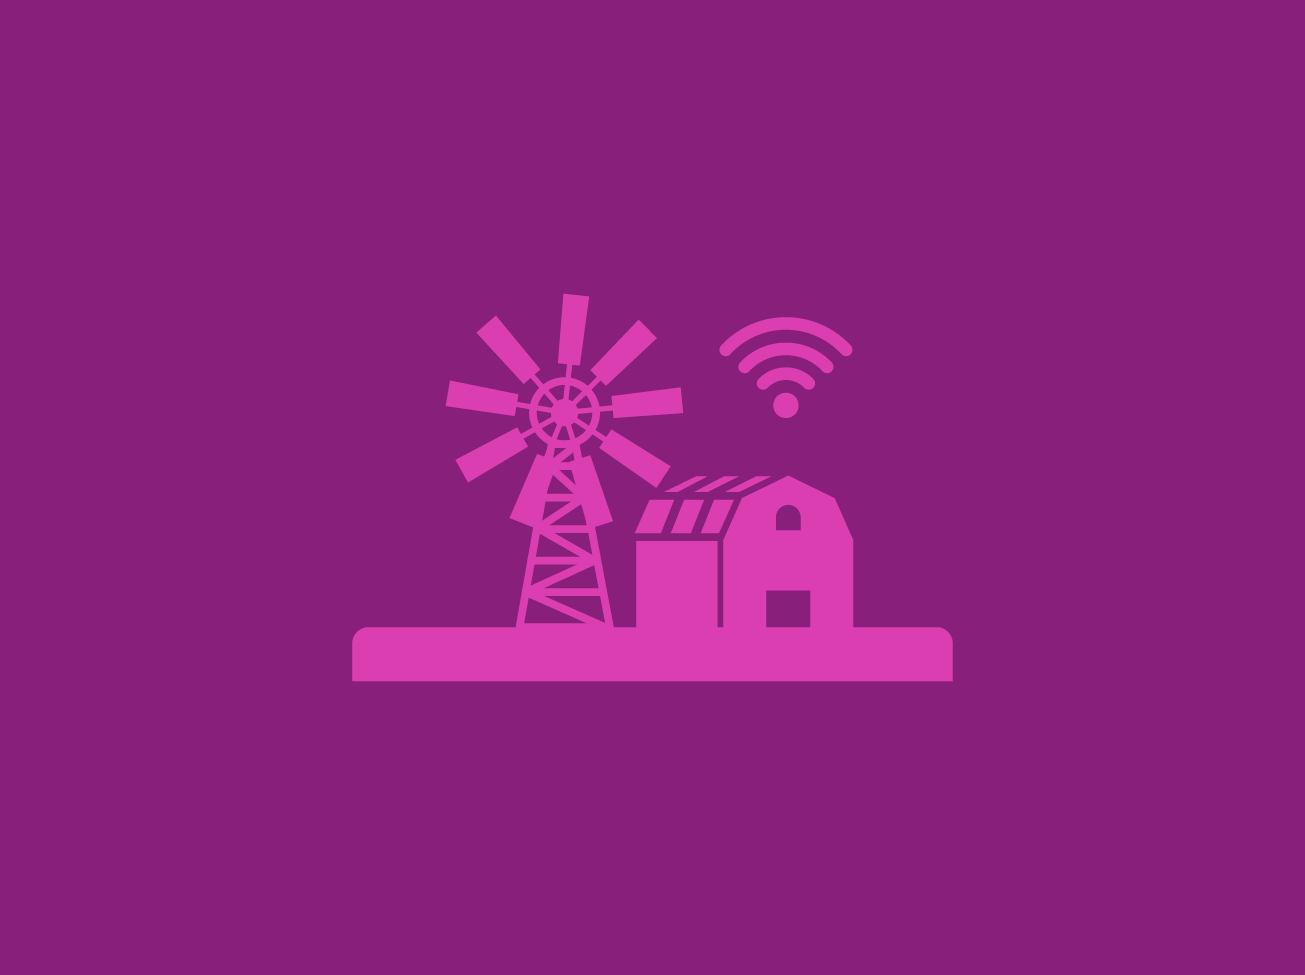 Image of a barn and windmill with a WiFi signal above the barn